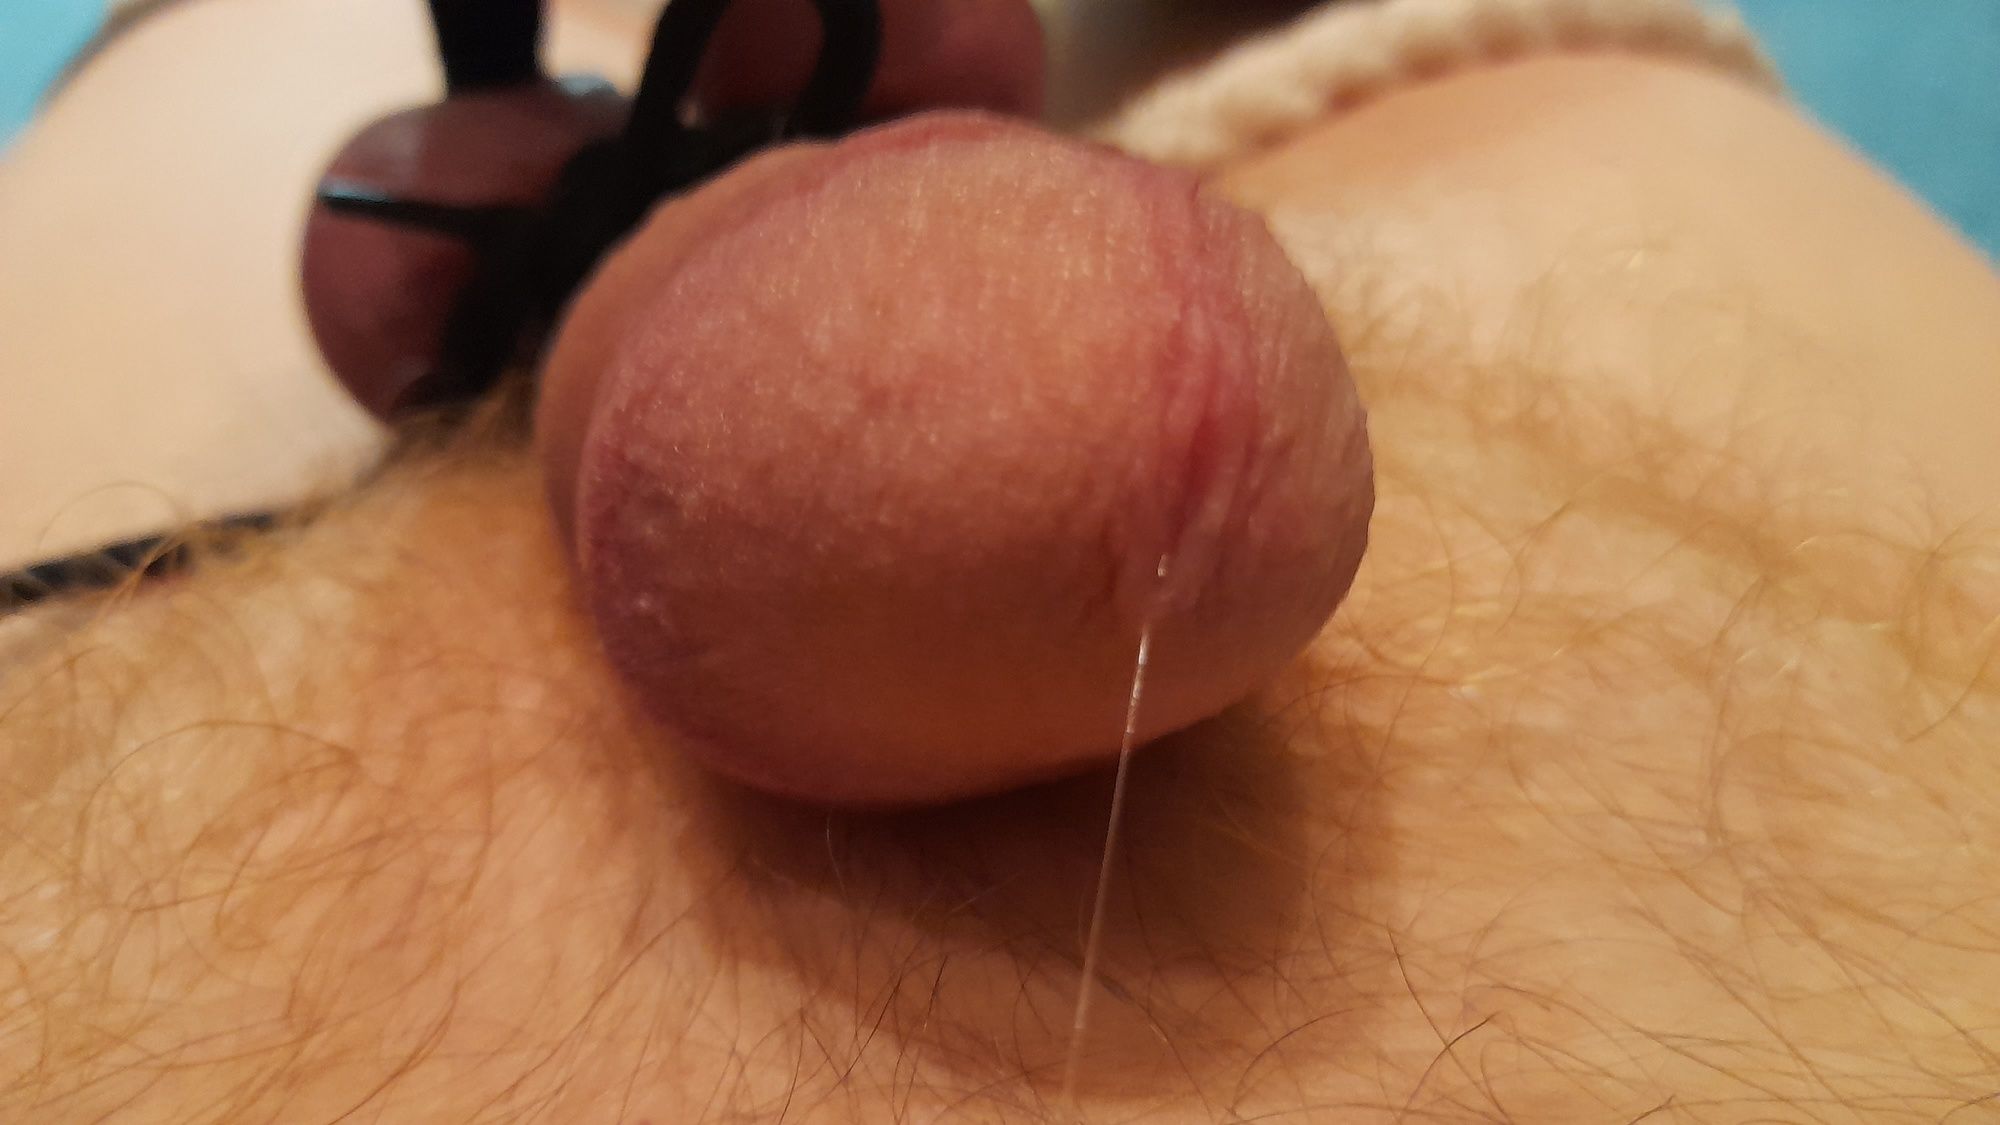 many pics of my cock #42